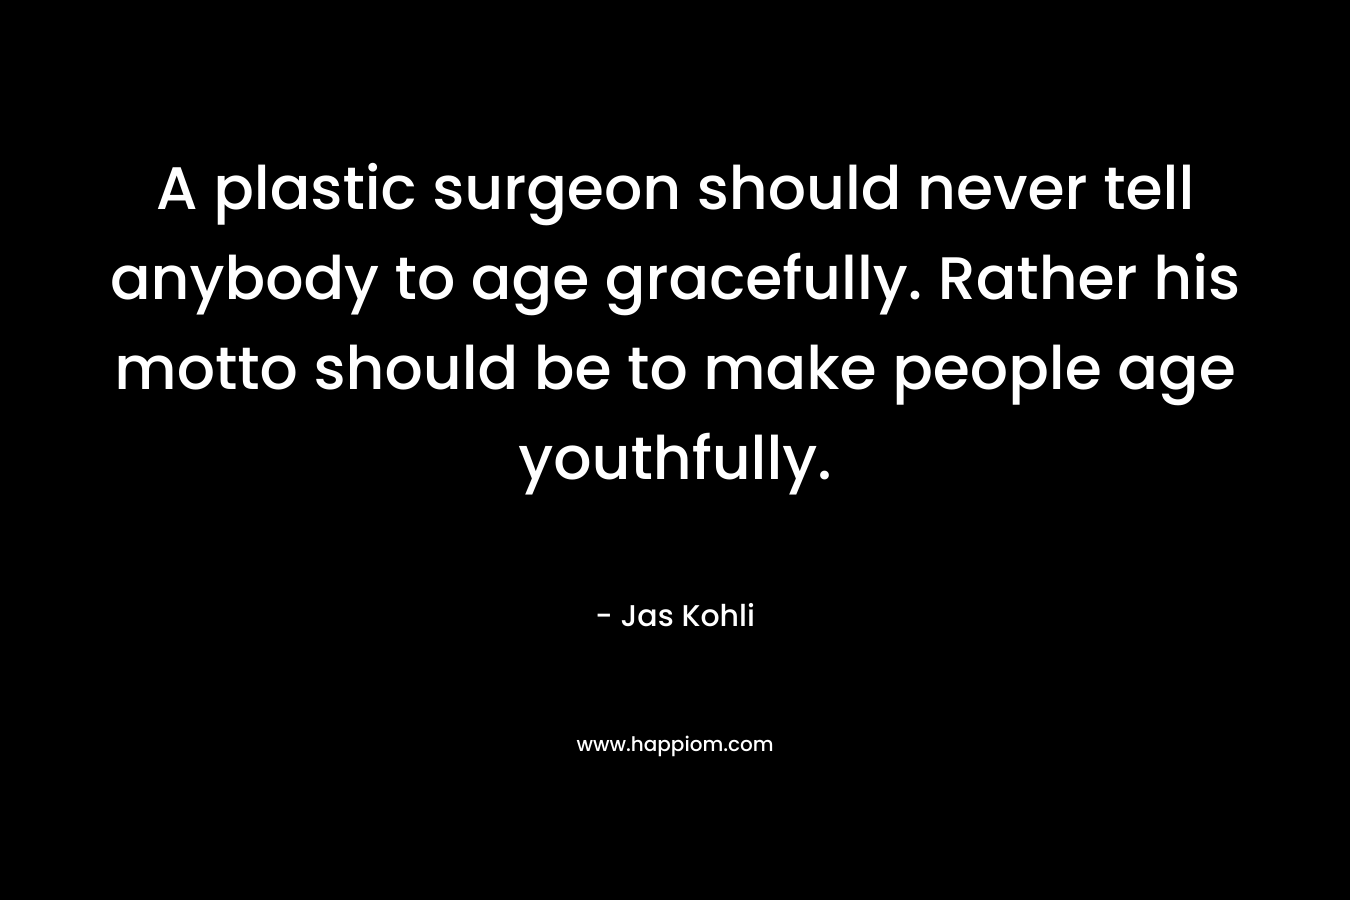 A plastic surgeon should never tell anybody to age gracefully. Rather his motto should be to make people age youthfully.